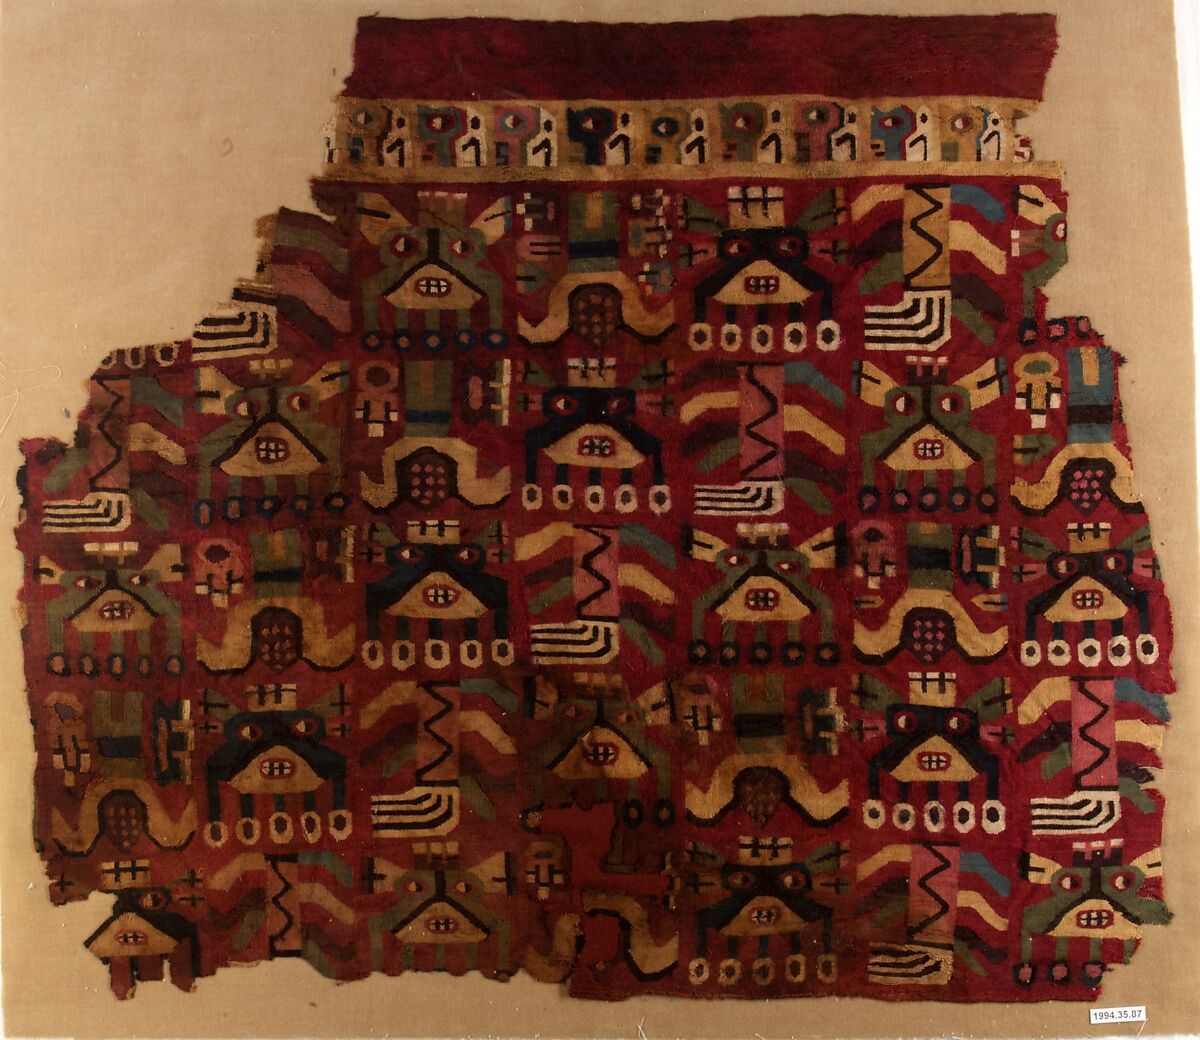 Woven Panel Fragment, Cotton, camelid hair, Peruvian 